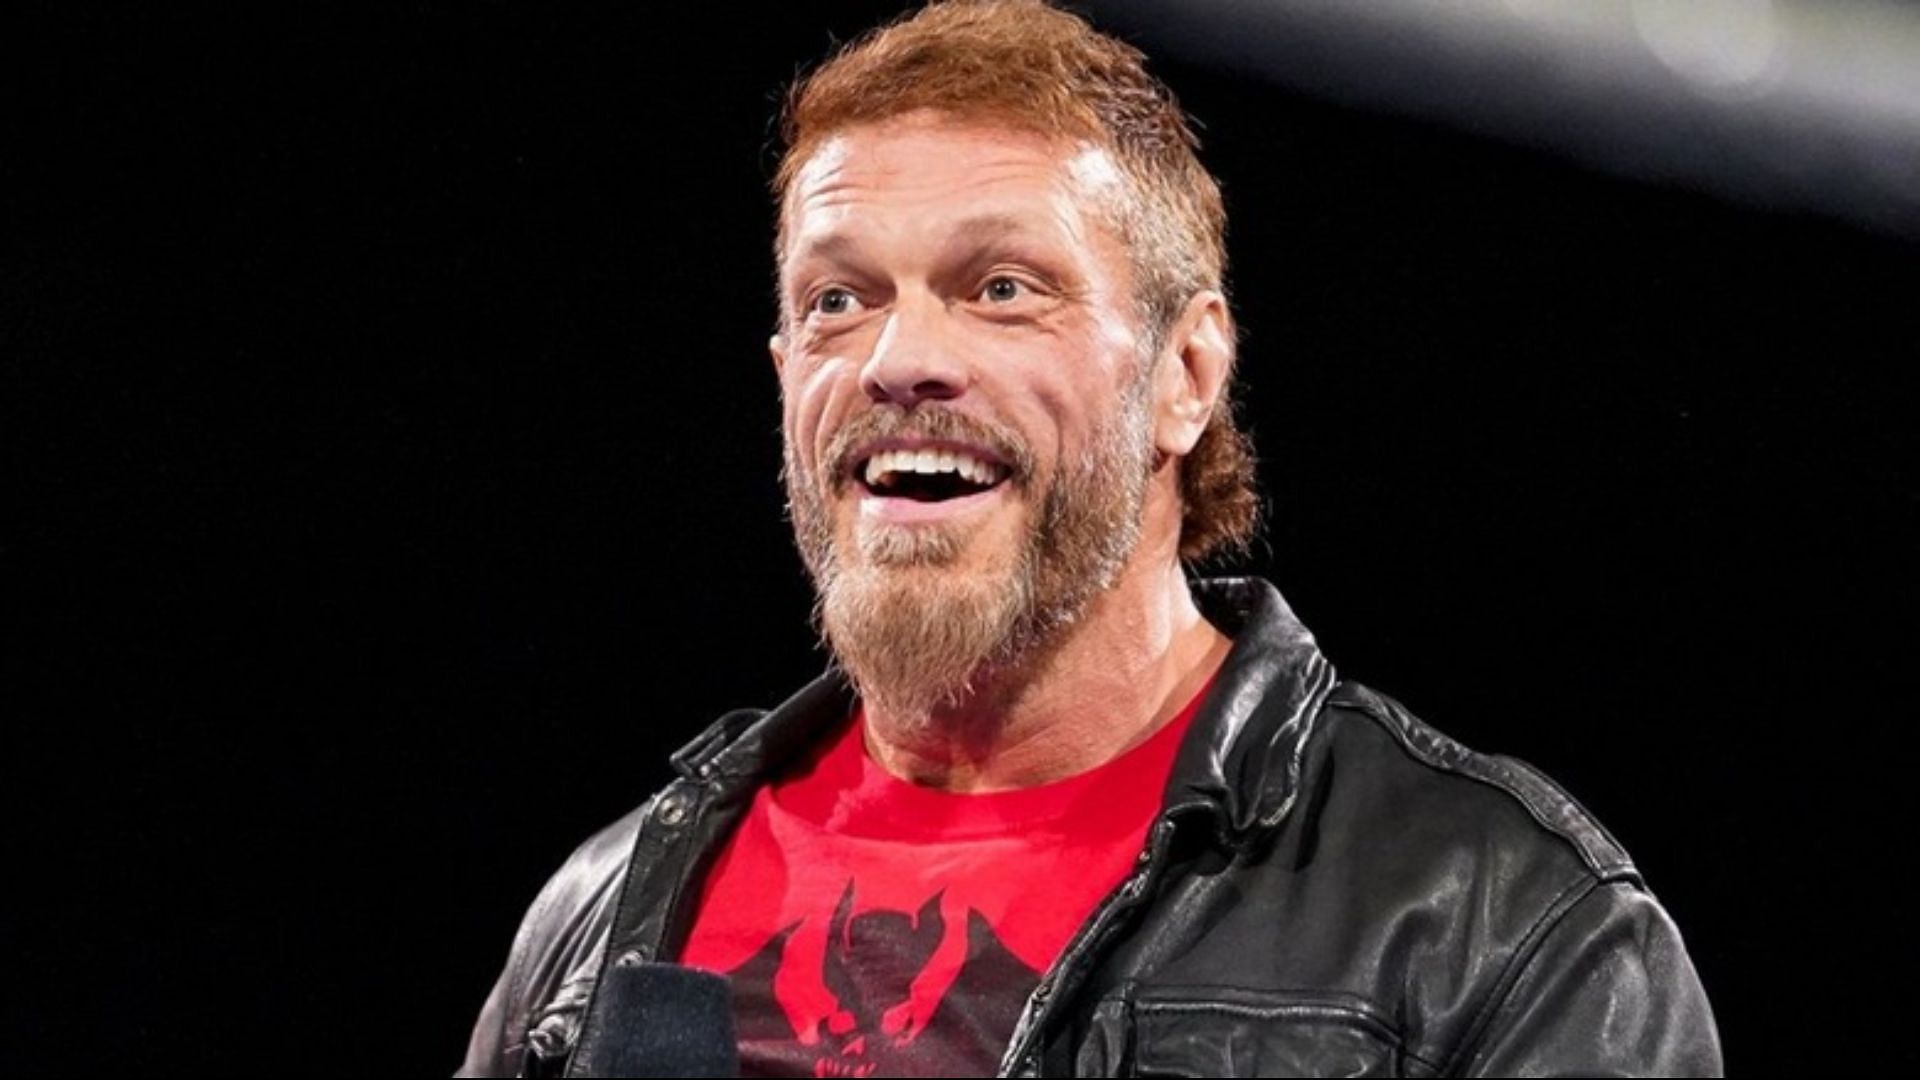 WWE Hall of Famer Edge is in his final run with the company